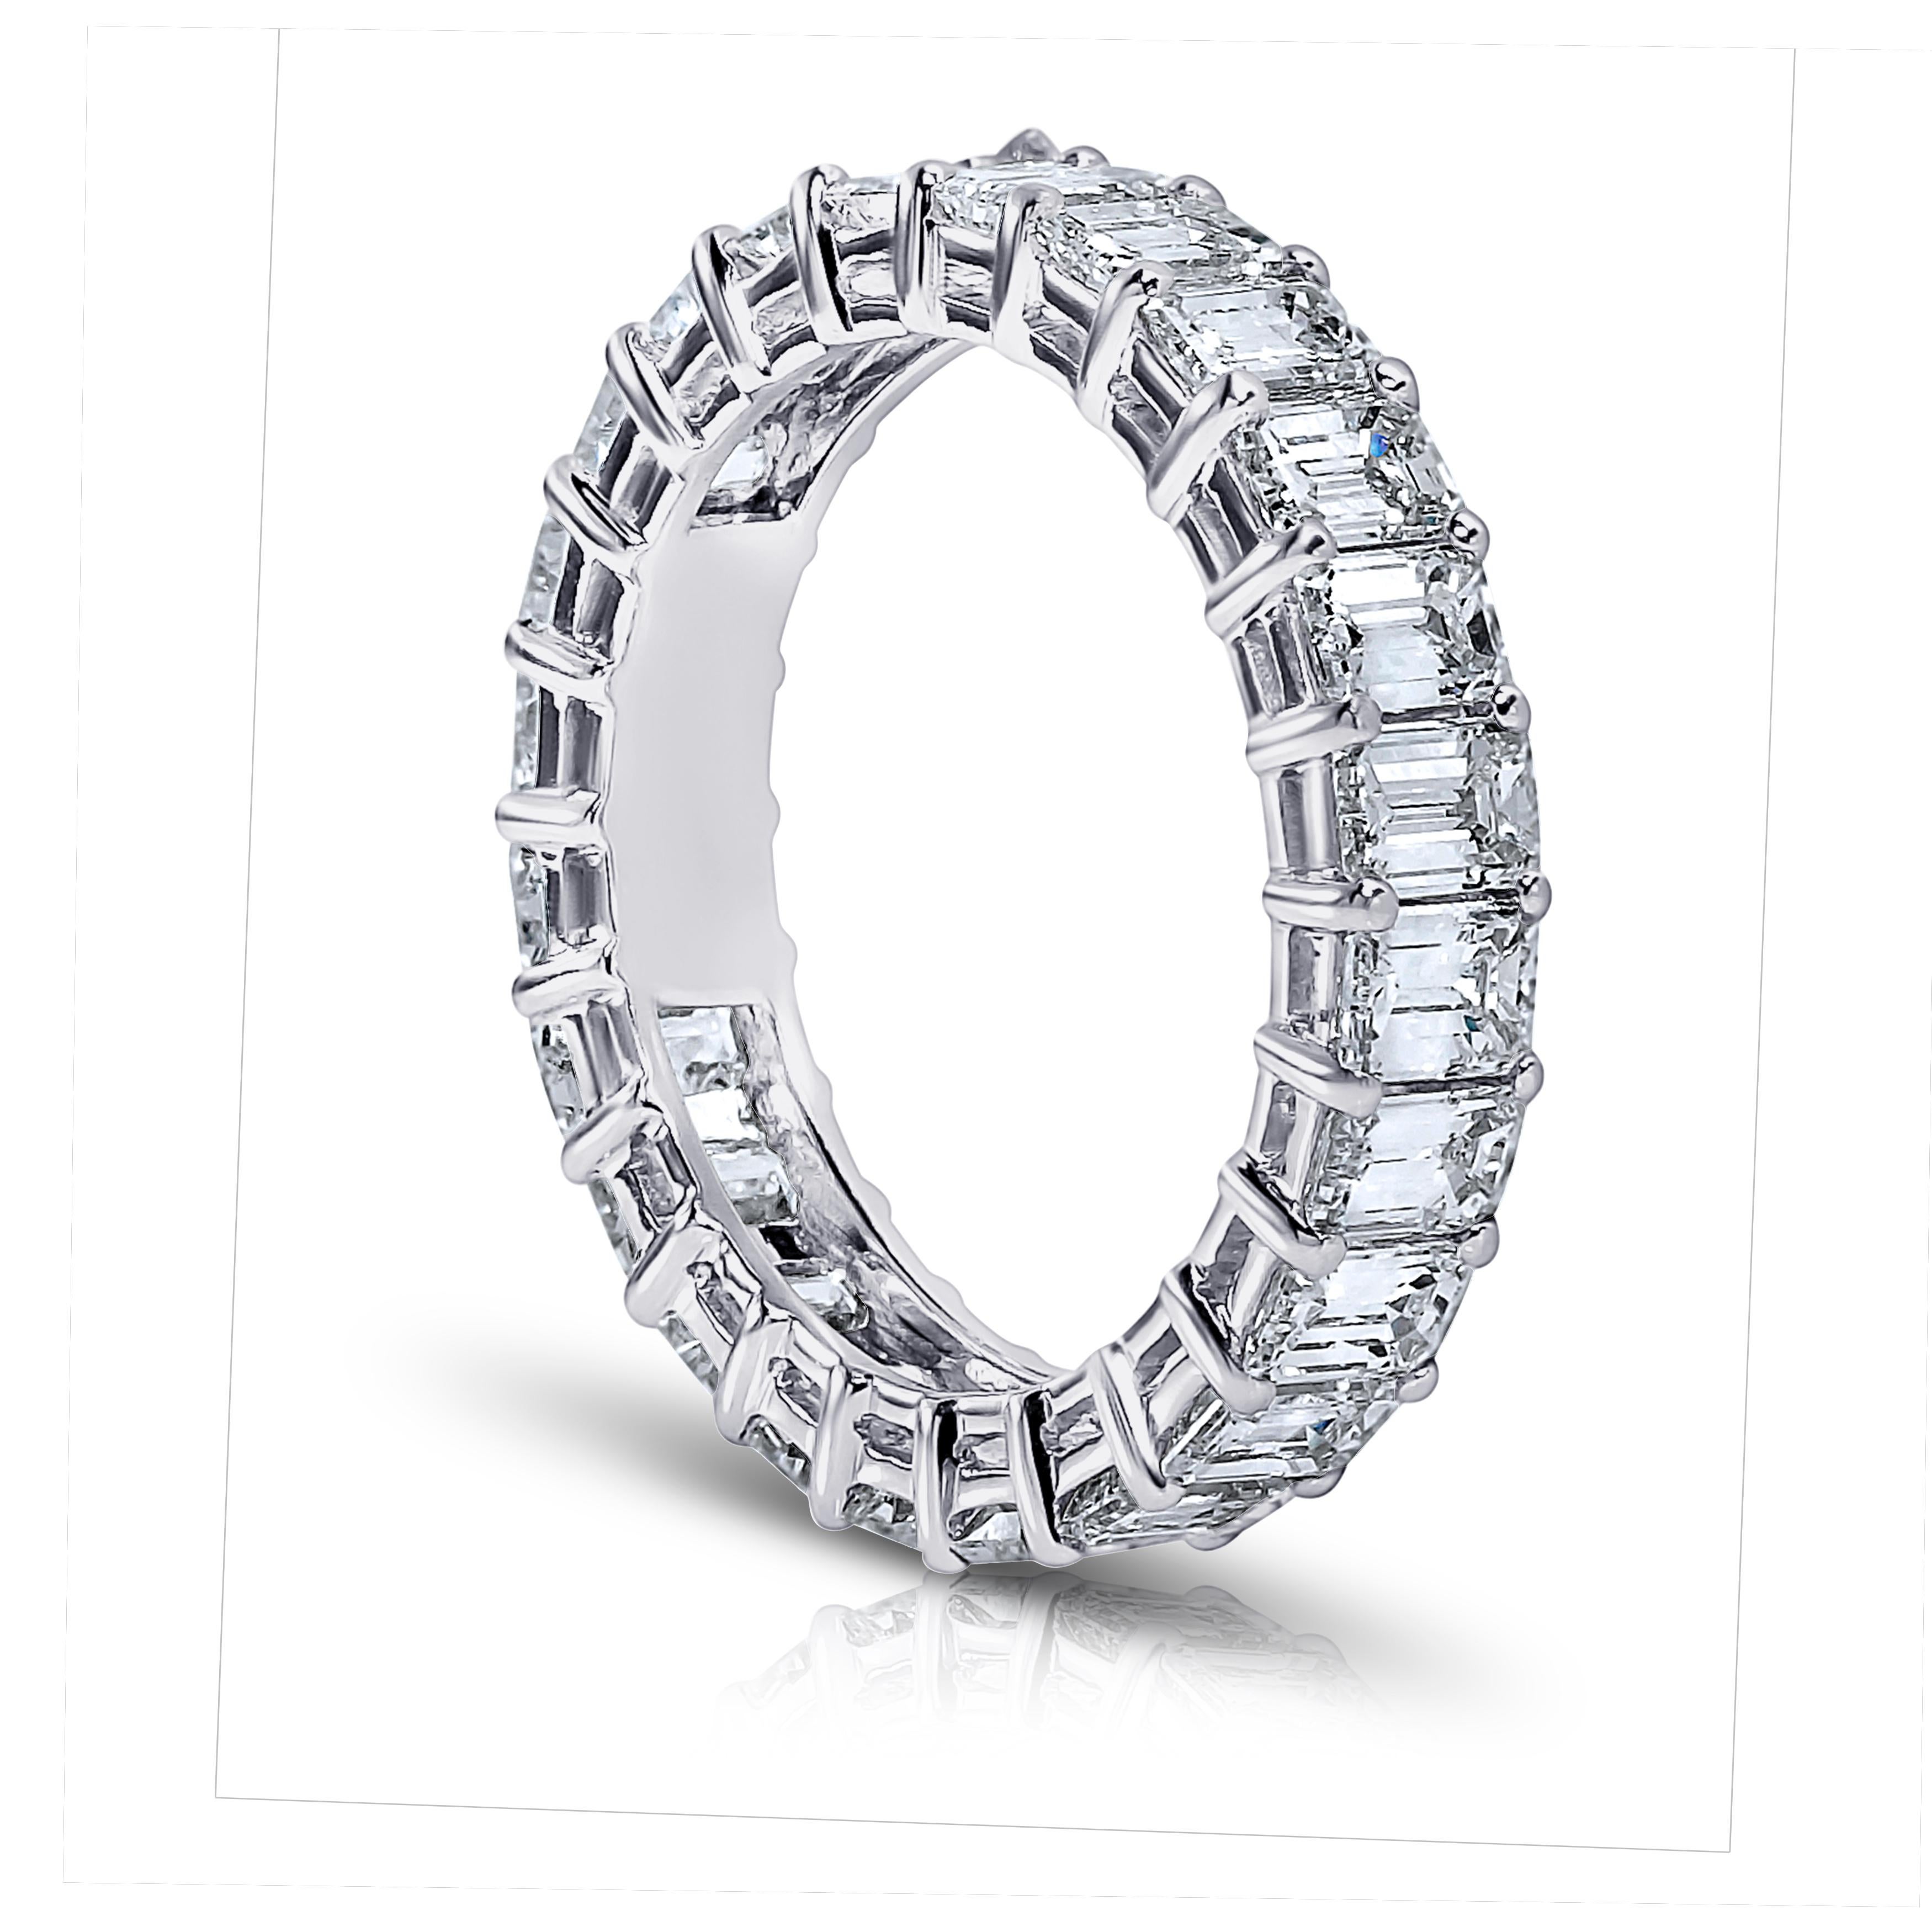 Emerald Cut diamond ring platinum eternity band shared prong style with a gallery.
24 perfectly matched diamonds weighing a minimum of 3.90cts. 
 Ranging from G-H in color . VVS1-VS2 in clarity .Finger size 6.
European Size 51.5 . British Size L1/2.